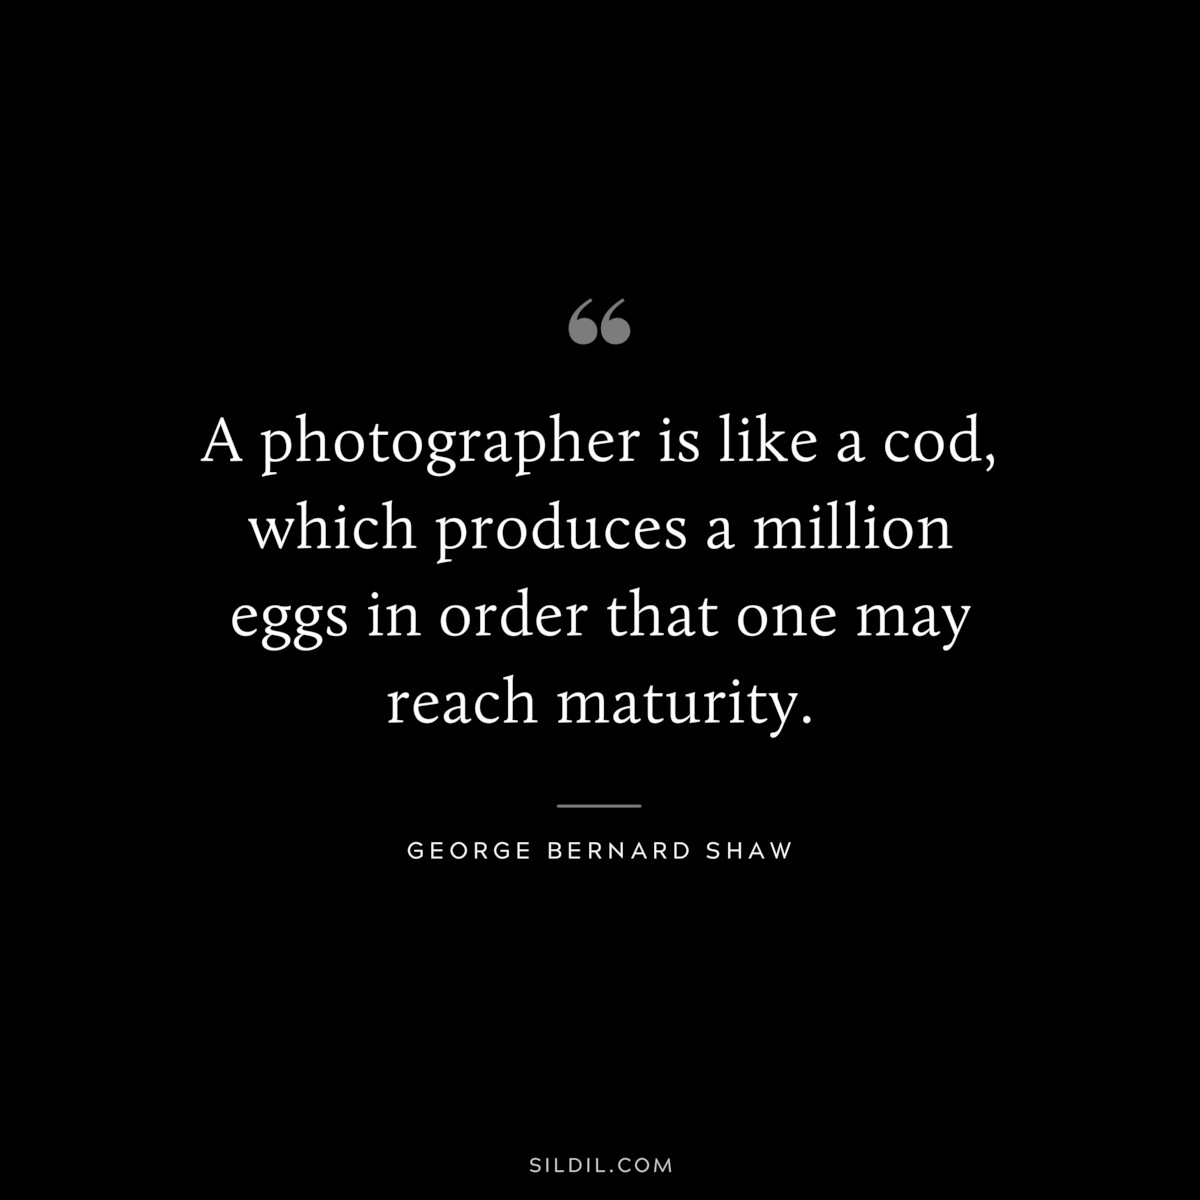 A photographer is like a cod, which produces a million eggs in order that one may reach maturity. ― George Bernard Shaw